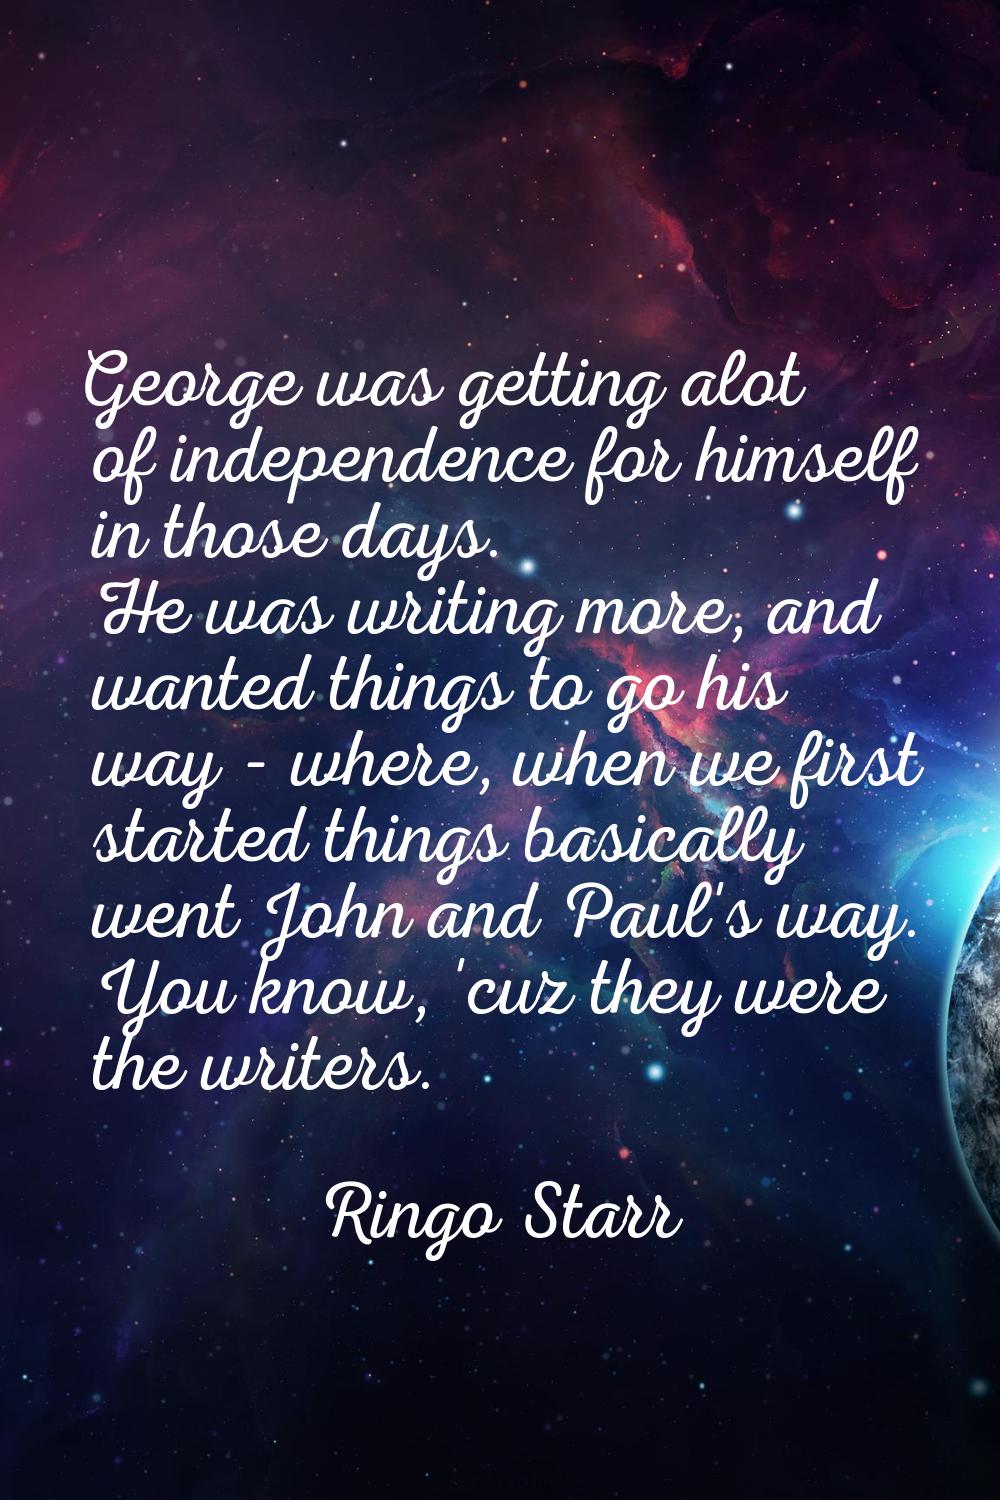 George was getting alot of independence for himself in those days. He was writing more, and wanted 